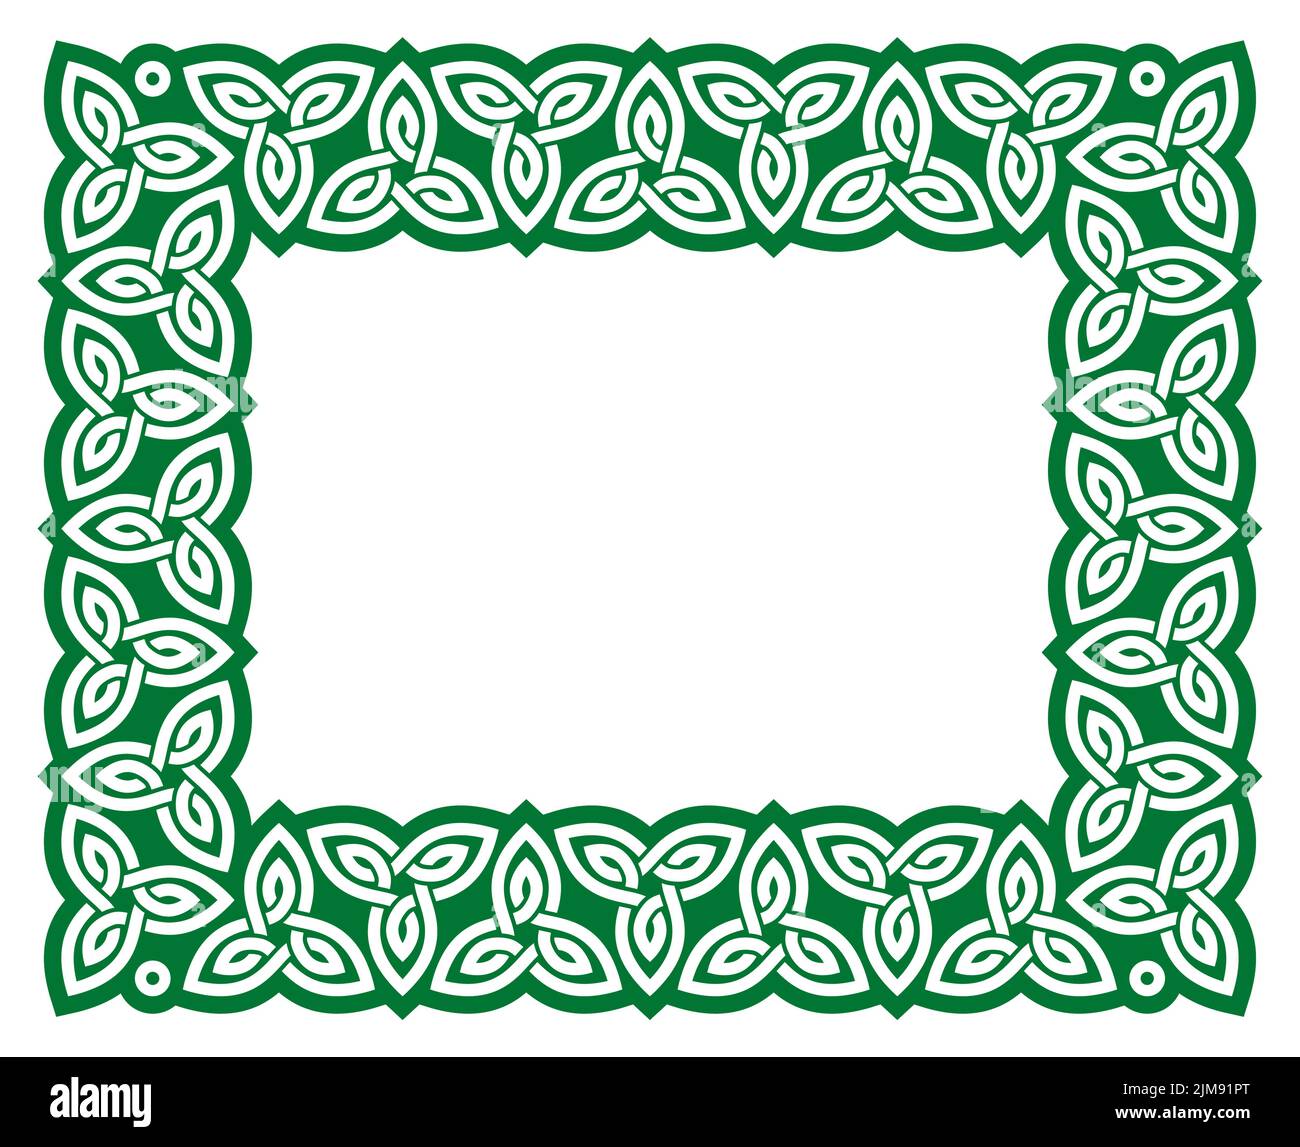 Irish Celtic vector frame design in green, traditional ractangle border perfect for greeting card or invitation Stock Vector